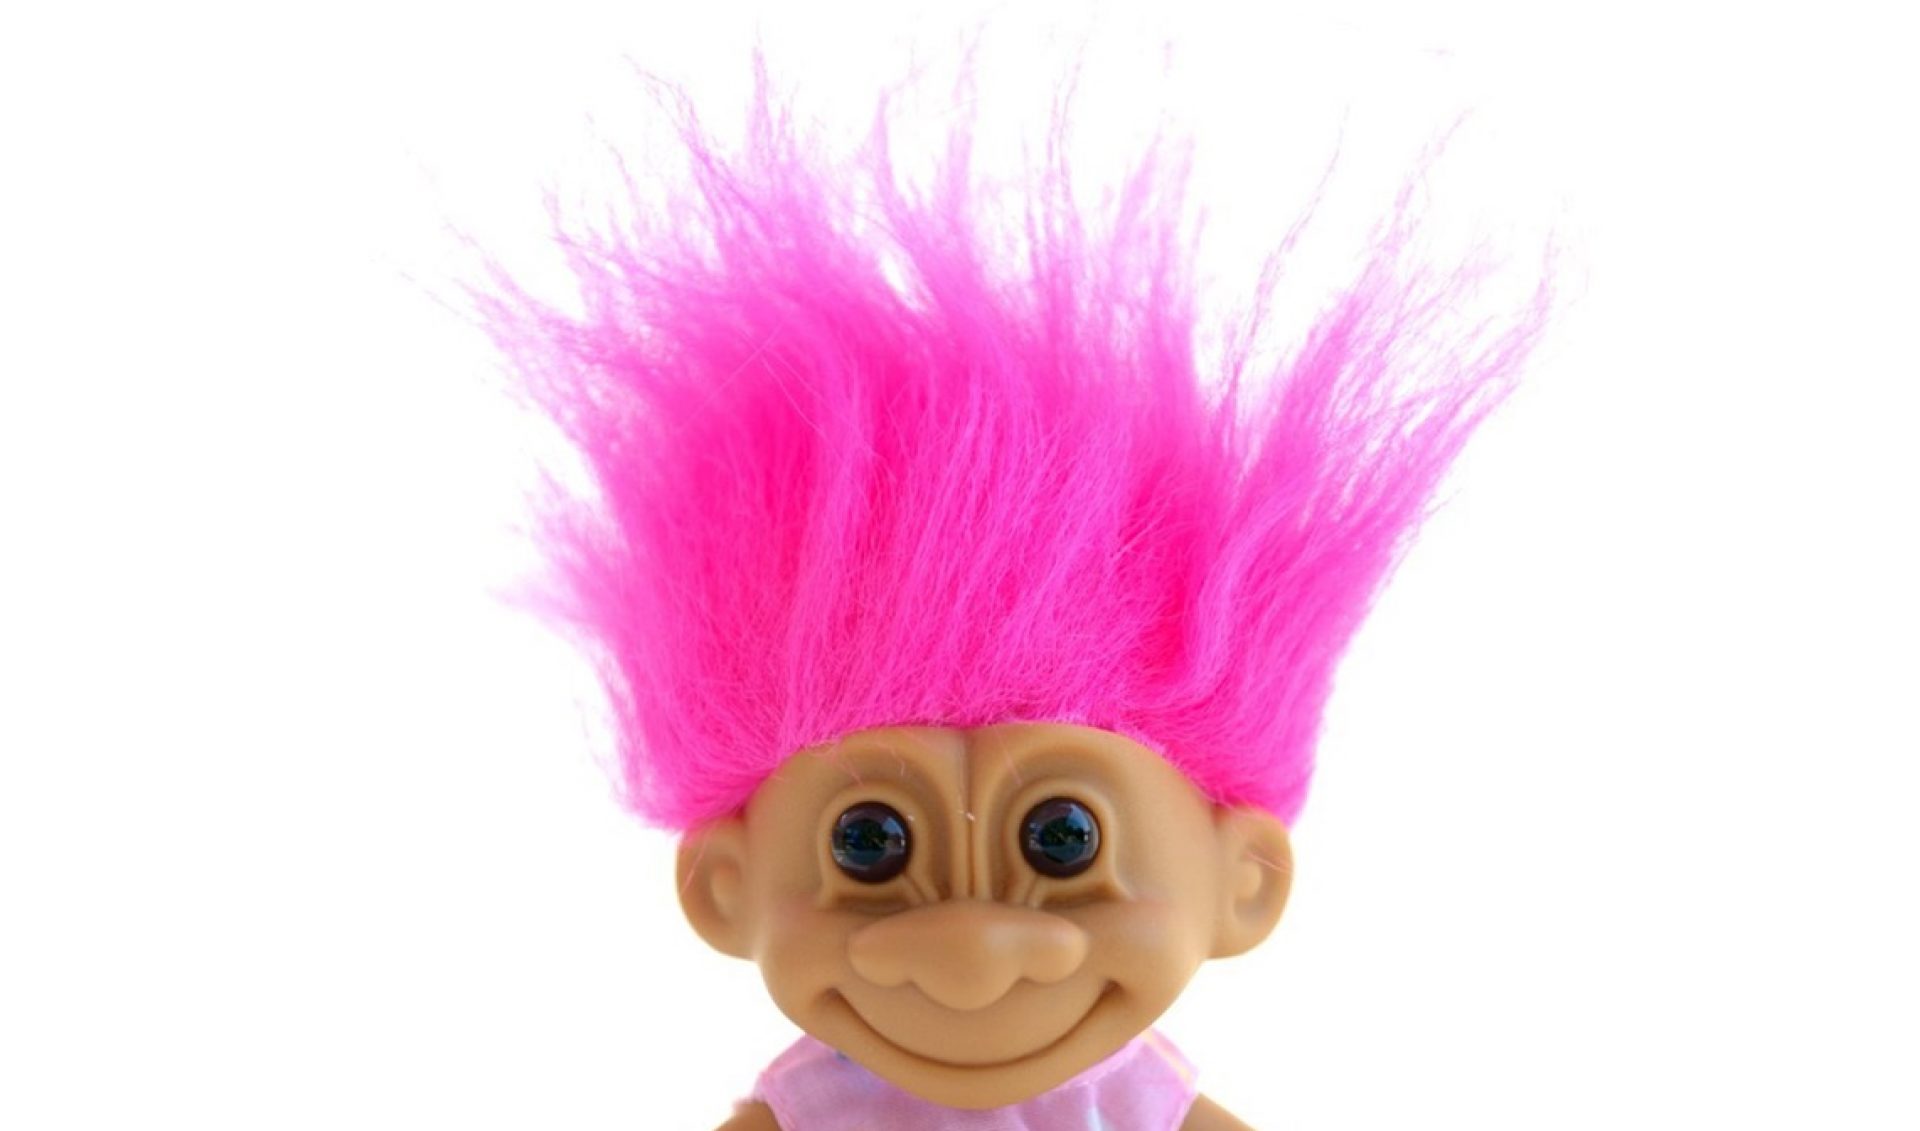 You Can Now Buy “Troll Insurance” In The UK